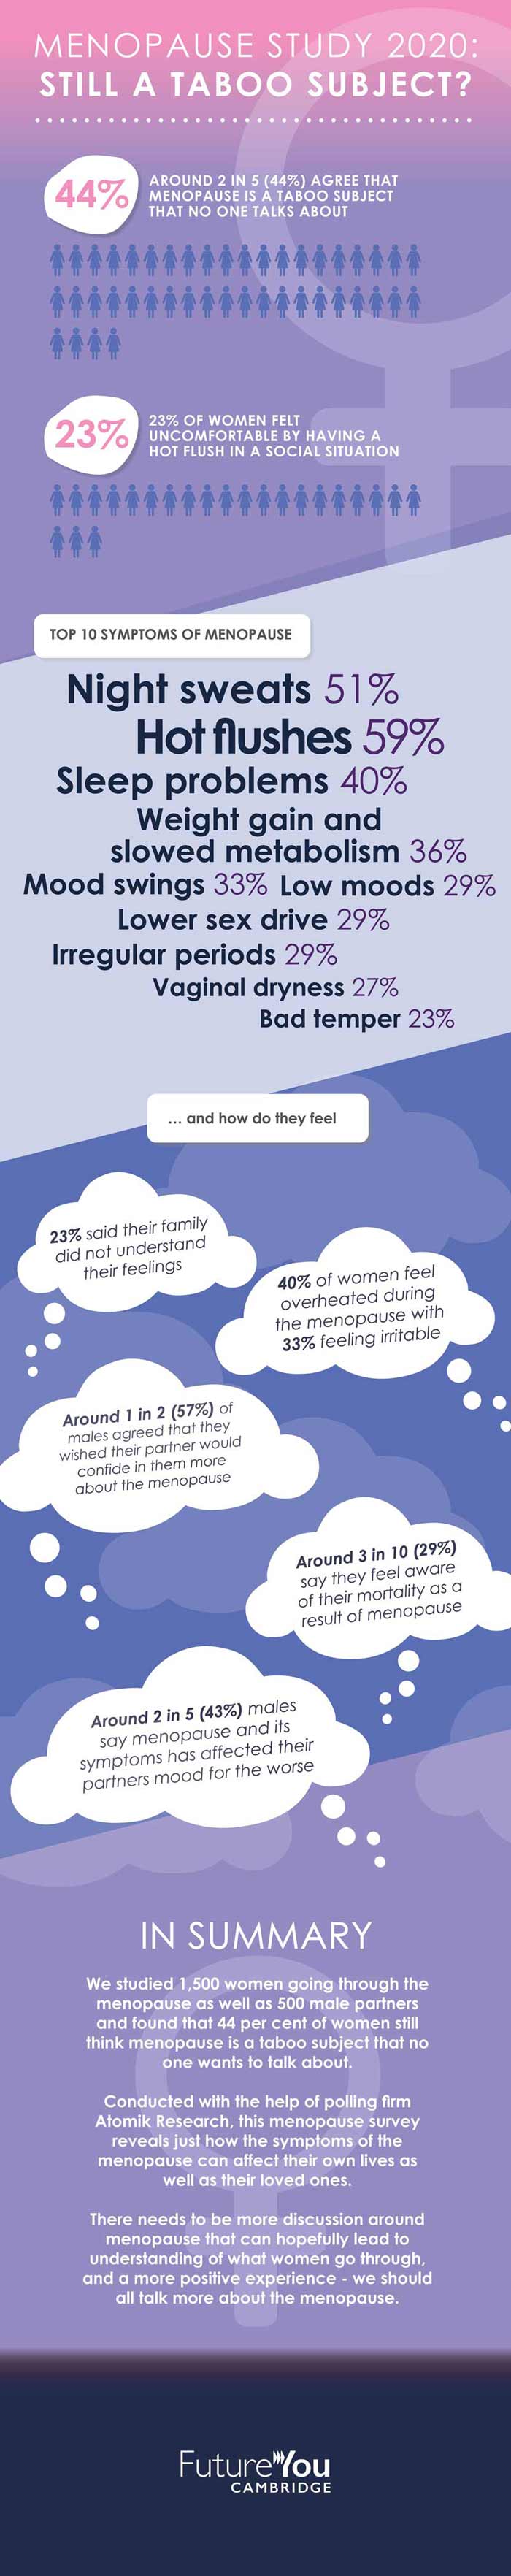 Menopause taboo infographic